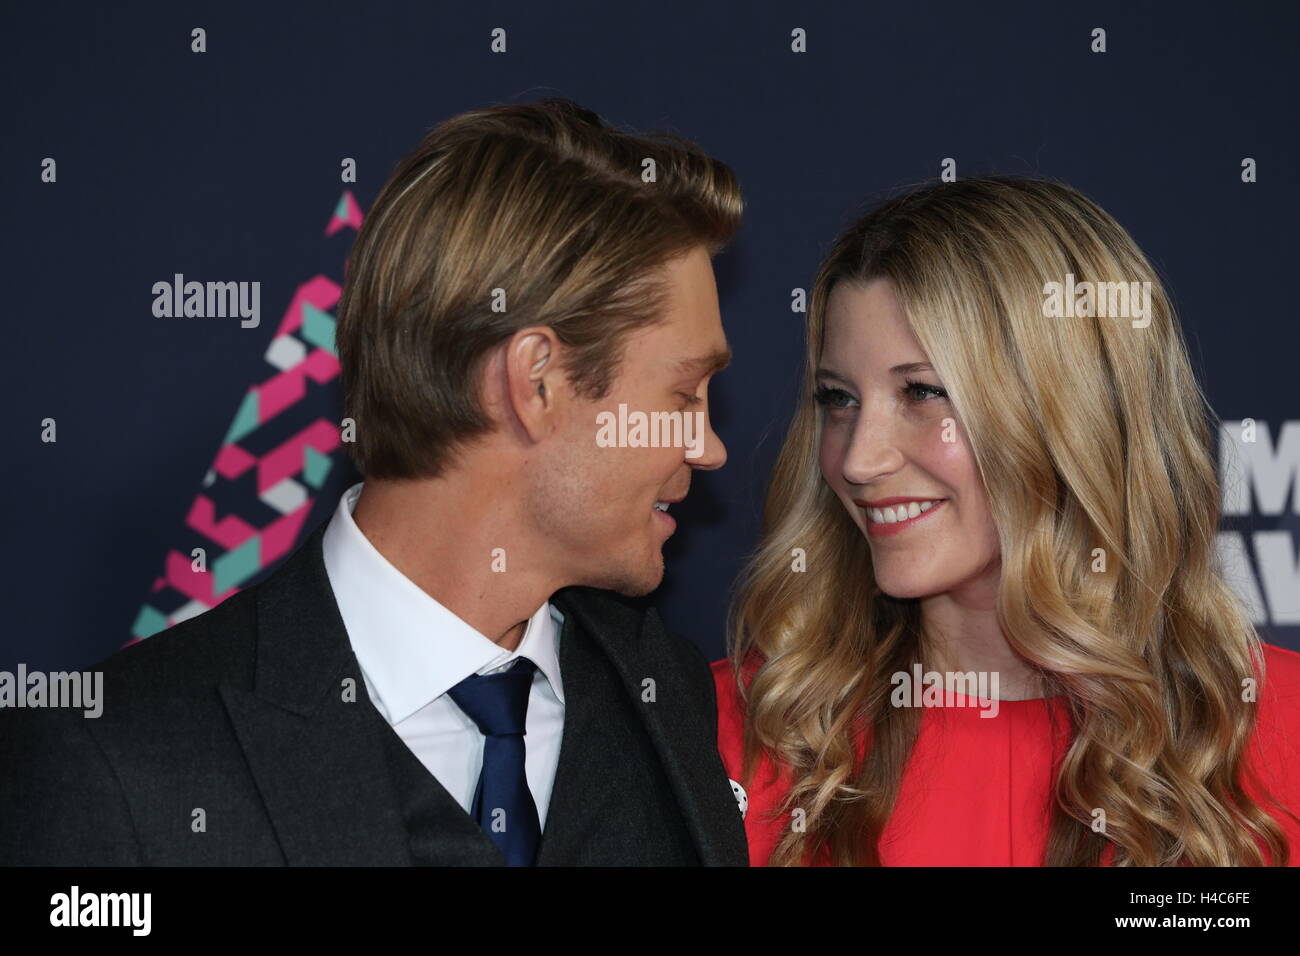 Chad Michael Murray walks Sarah Roemer on the red carpet at the CMT Music Awards at Bridgestone Arena on June 8th, 2016 in Nashville, TN. Stock Photo